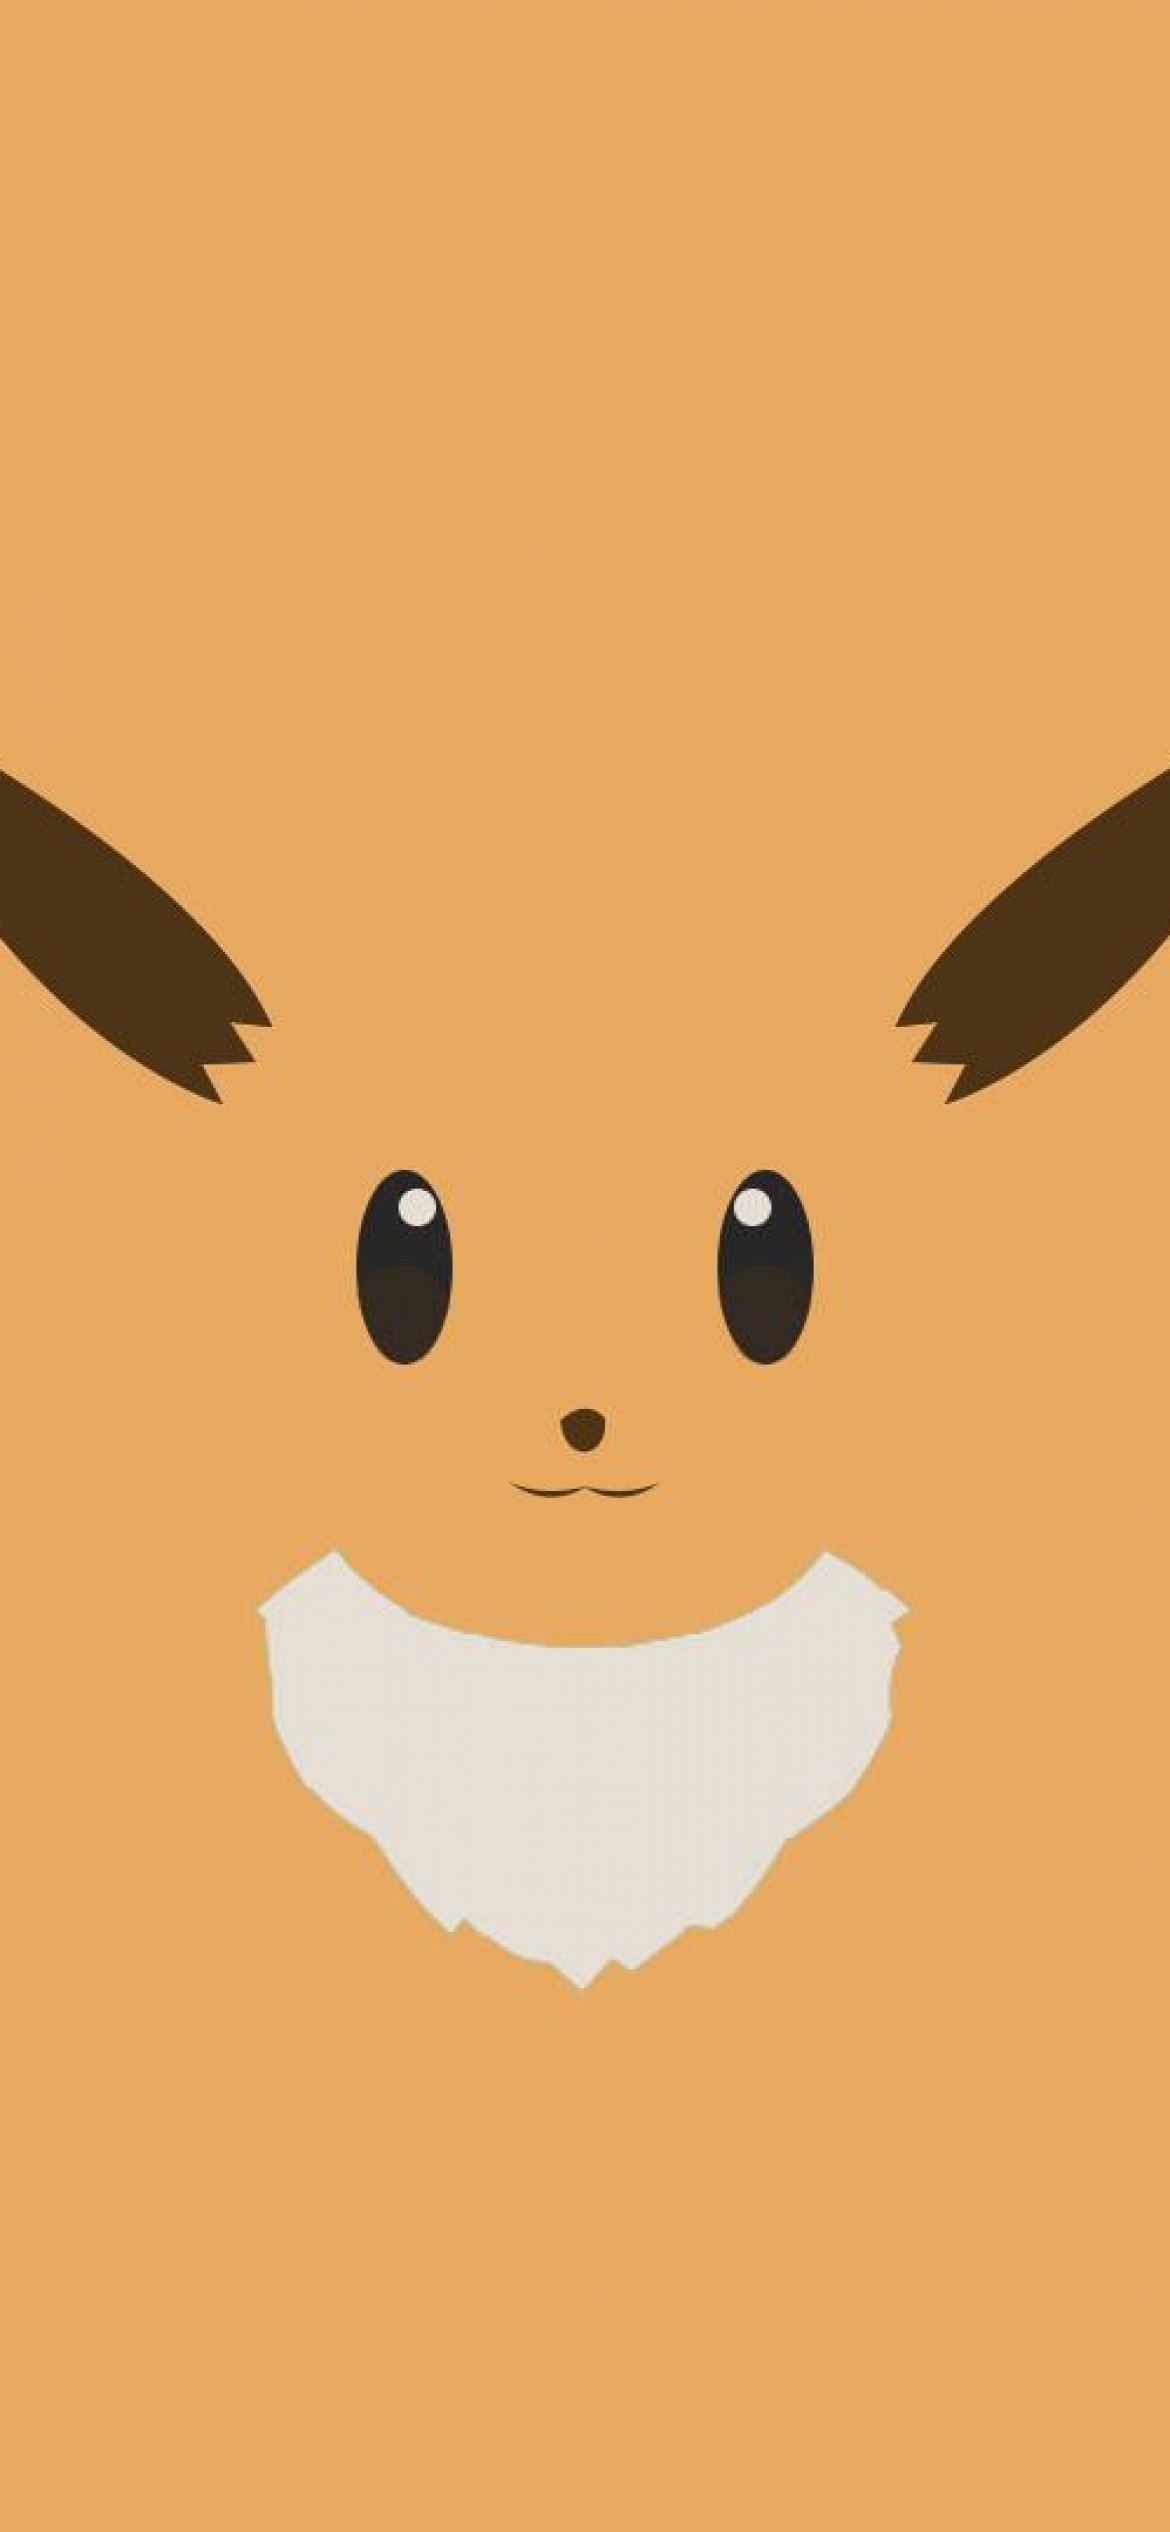 PokéJungle Gen IX on Twitter Sharing all 9 Eevee backgrounds that are  part of a Japanese campaign Click through to the thread for the rest  httpstcoT17bFAtyqc  X